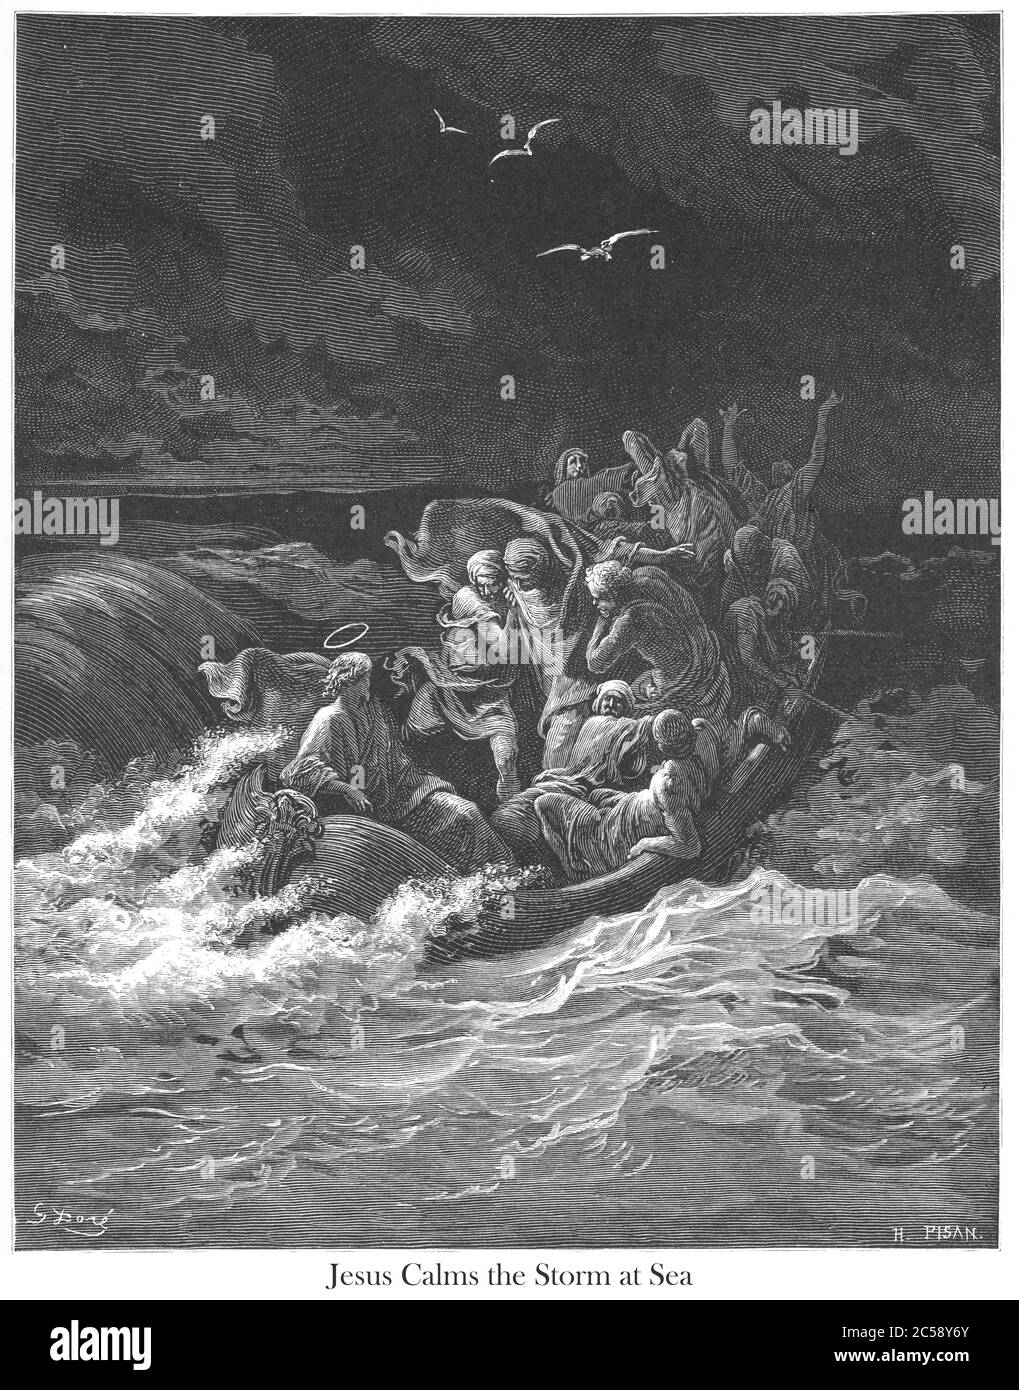 Jesus Stilling the Tempest or Jesus calming the storm [Mark 4:37-38] From the book 'Bible Gallery' Illustrated by Gustave Dore with Memoir of Dore and Descriptive Letter-press by Talbot W. Chambers D.D. Published by Cassell & Company Limited in London and simultaneously by Mame in Tours, France in 1866 Stock Photo